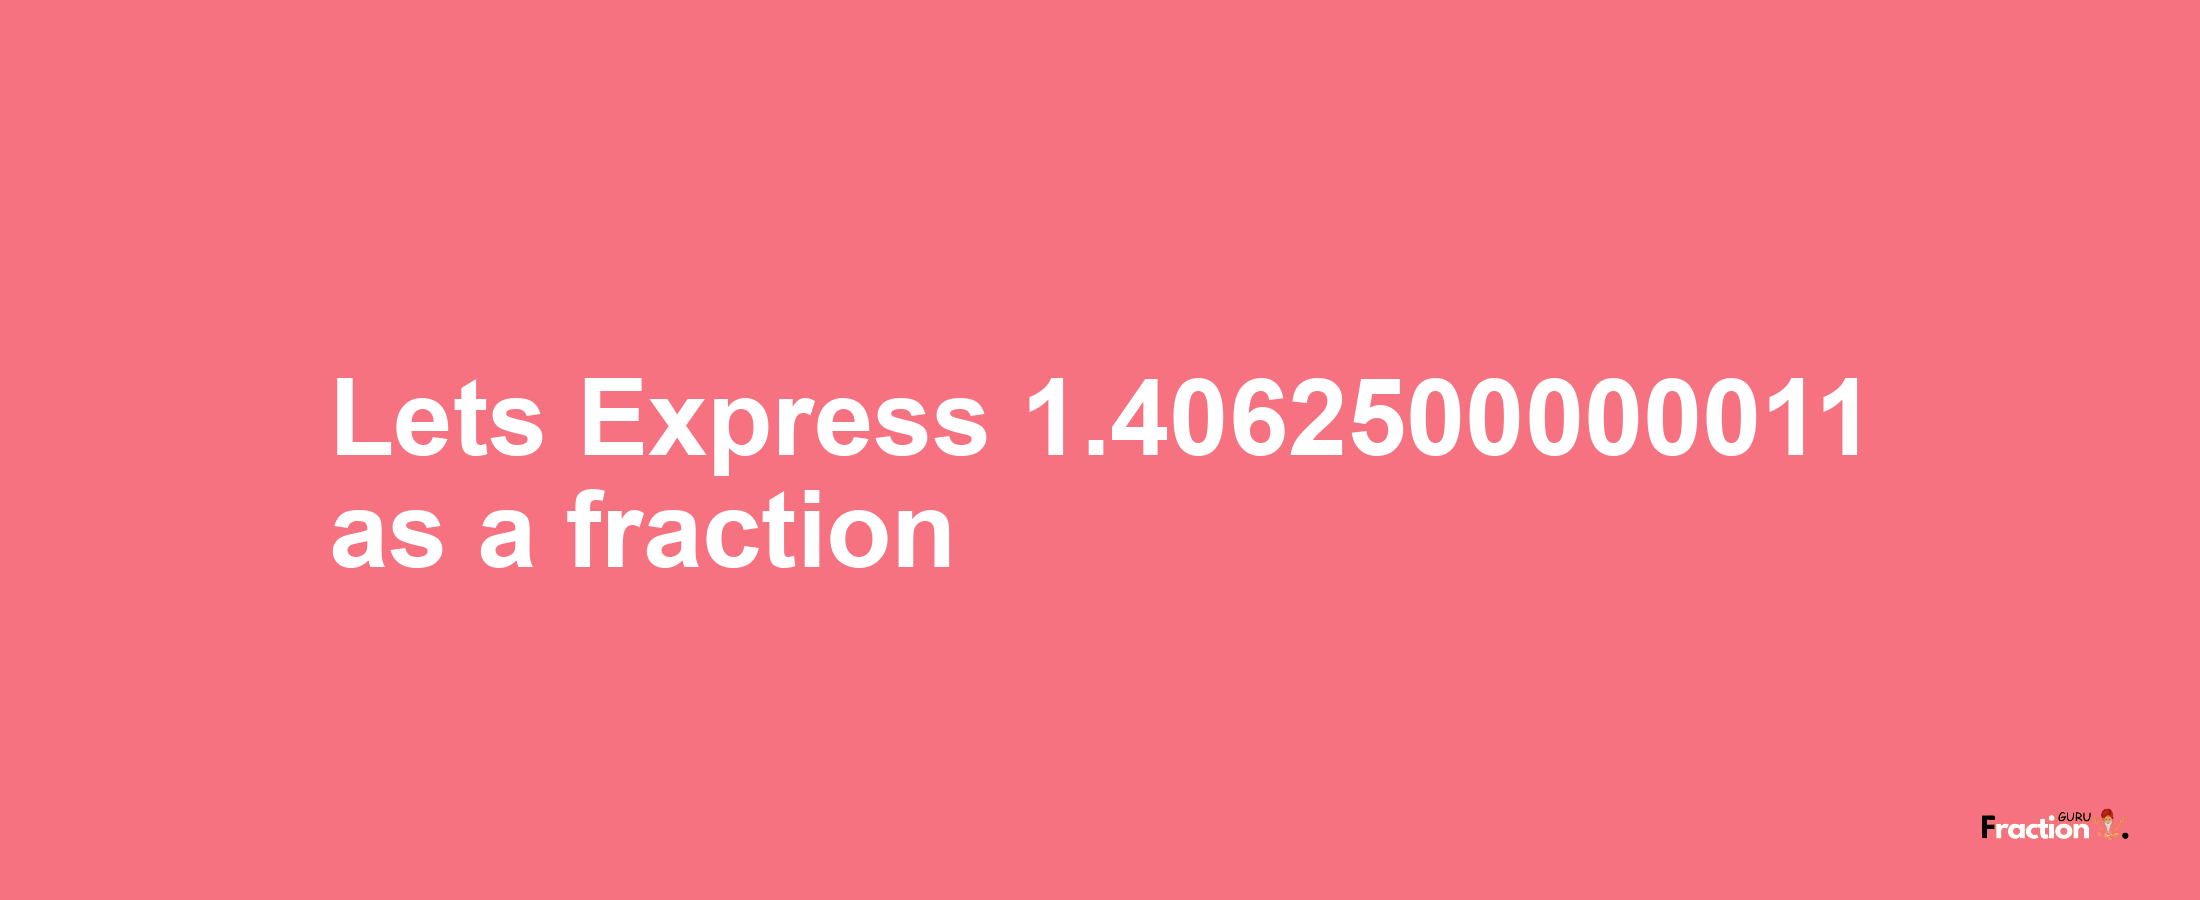 Lets Express 1.4062500000011 as afraction